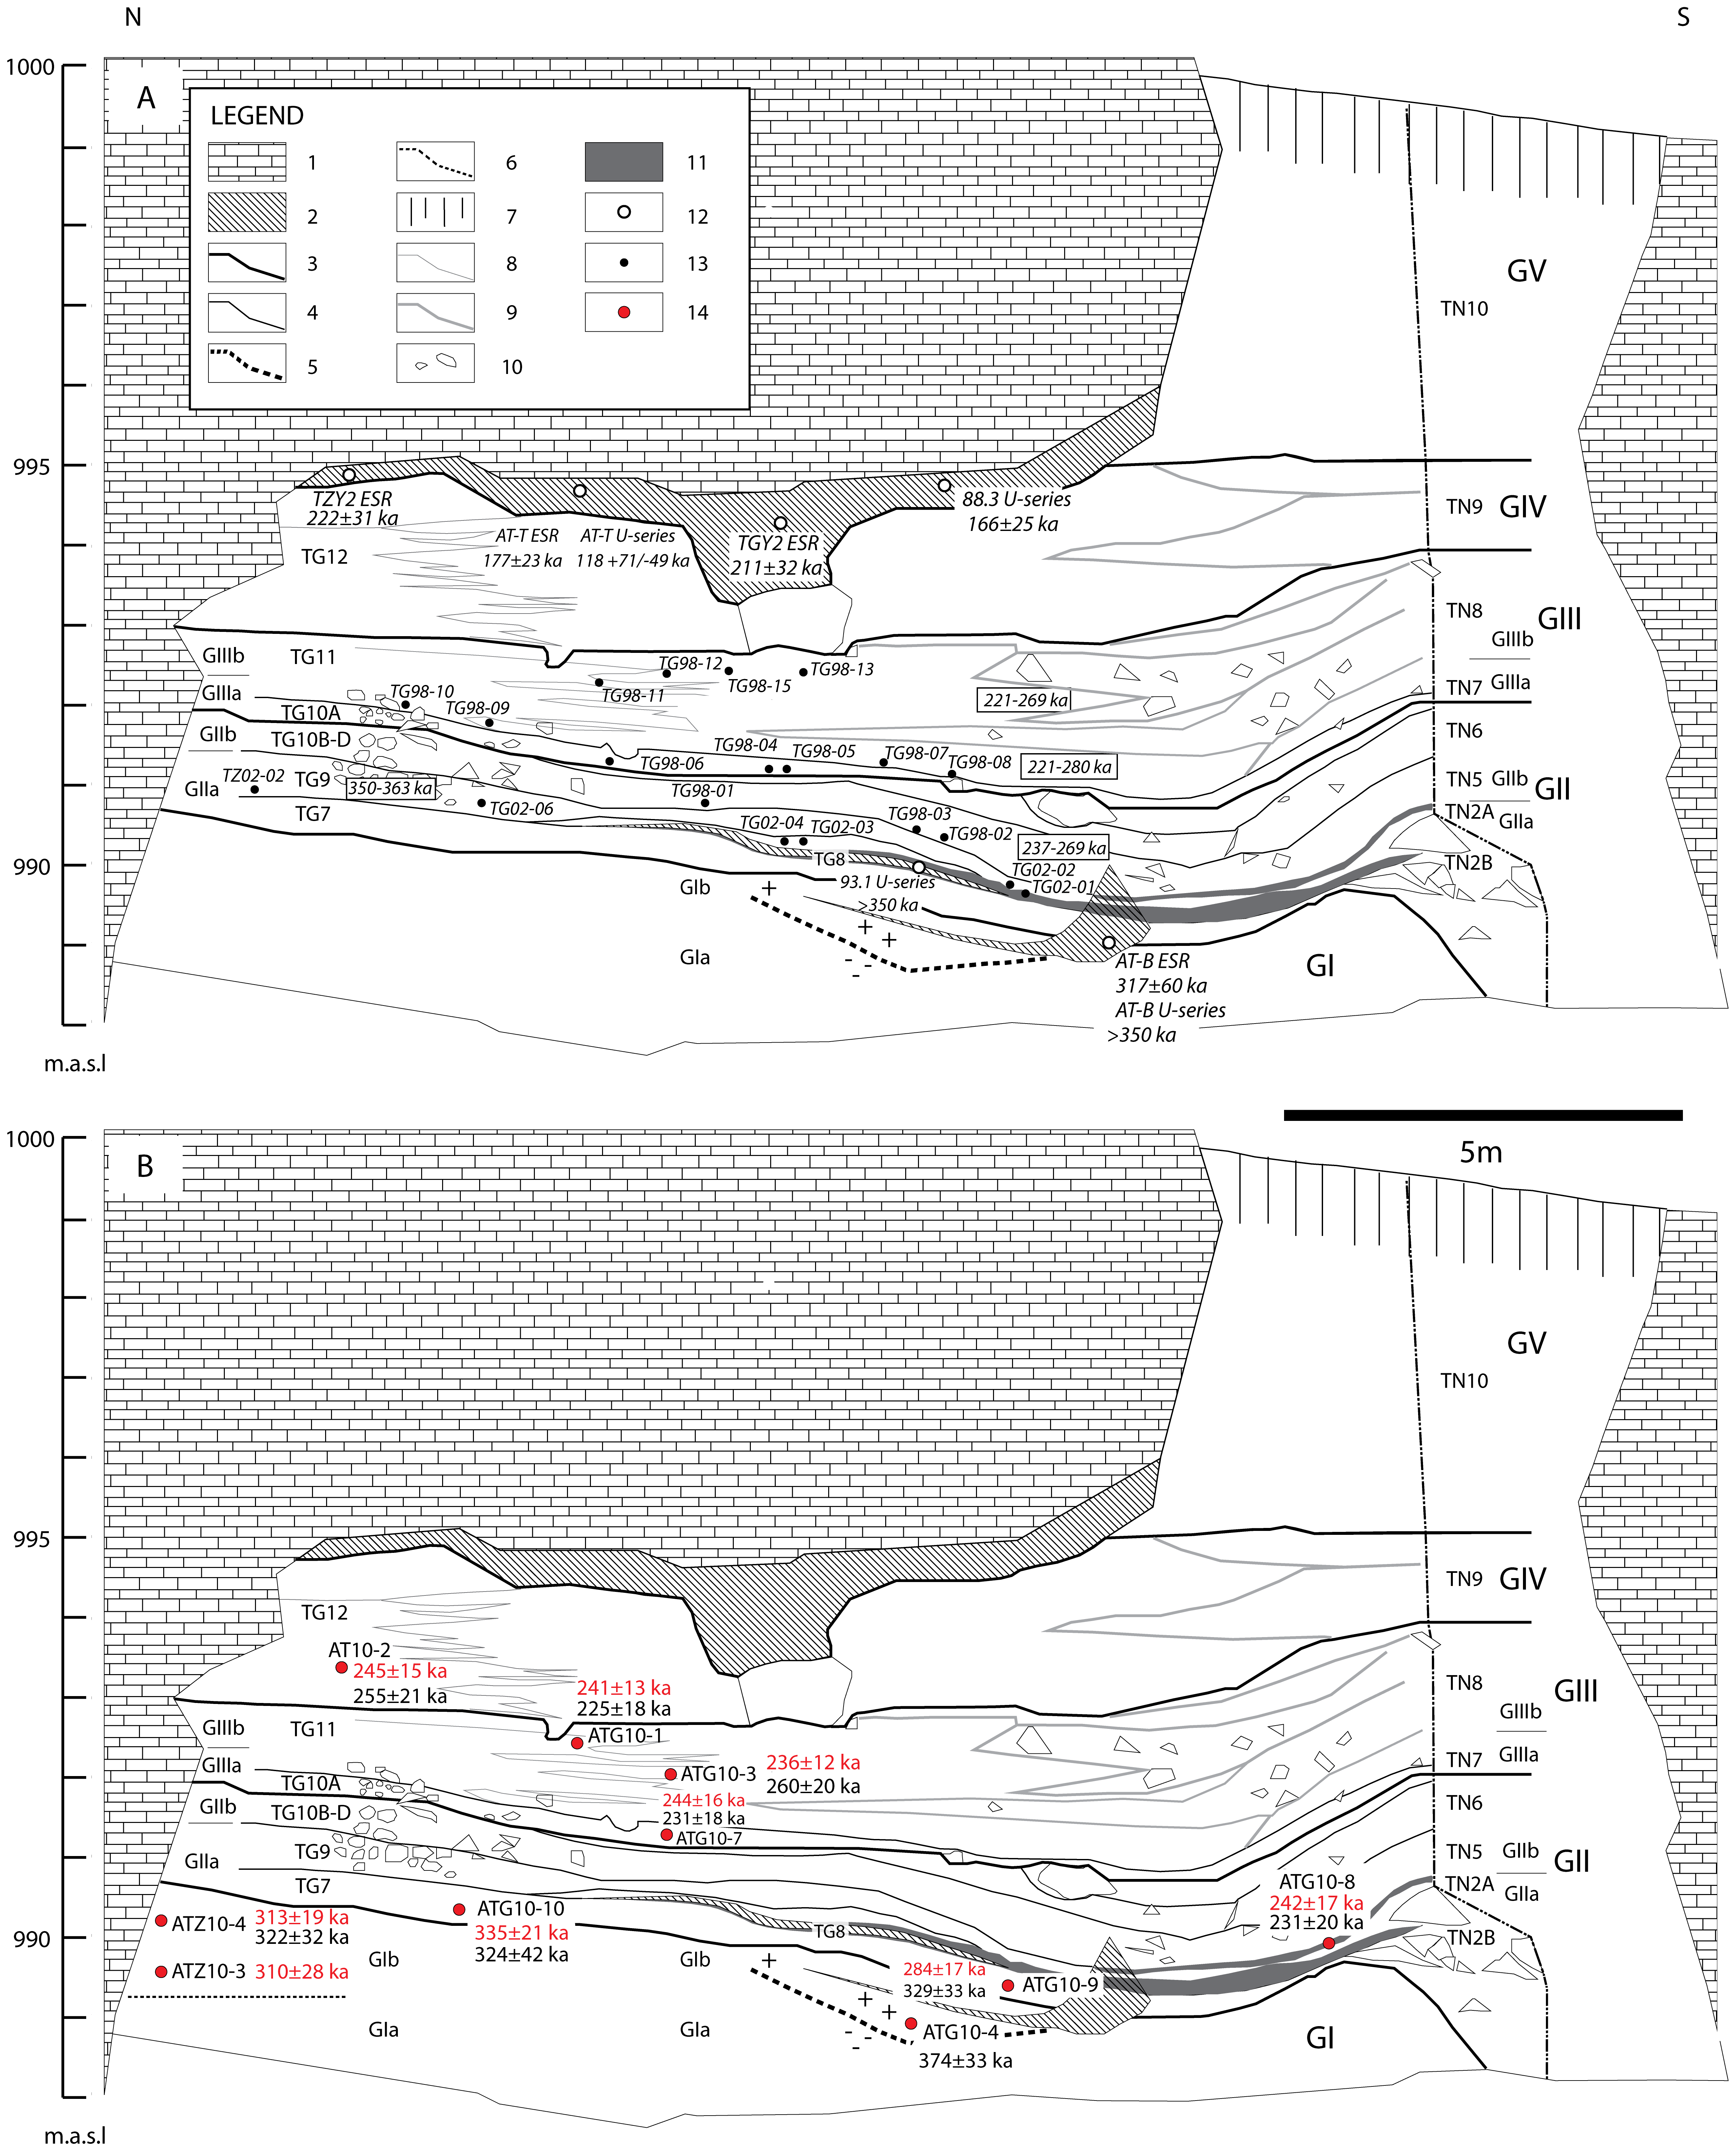 Figure 2 Stratigraphic sequence of the cave deposits at Galería Complex.